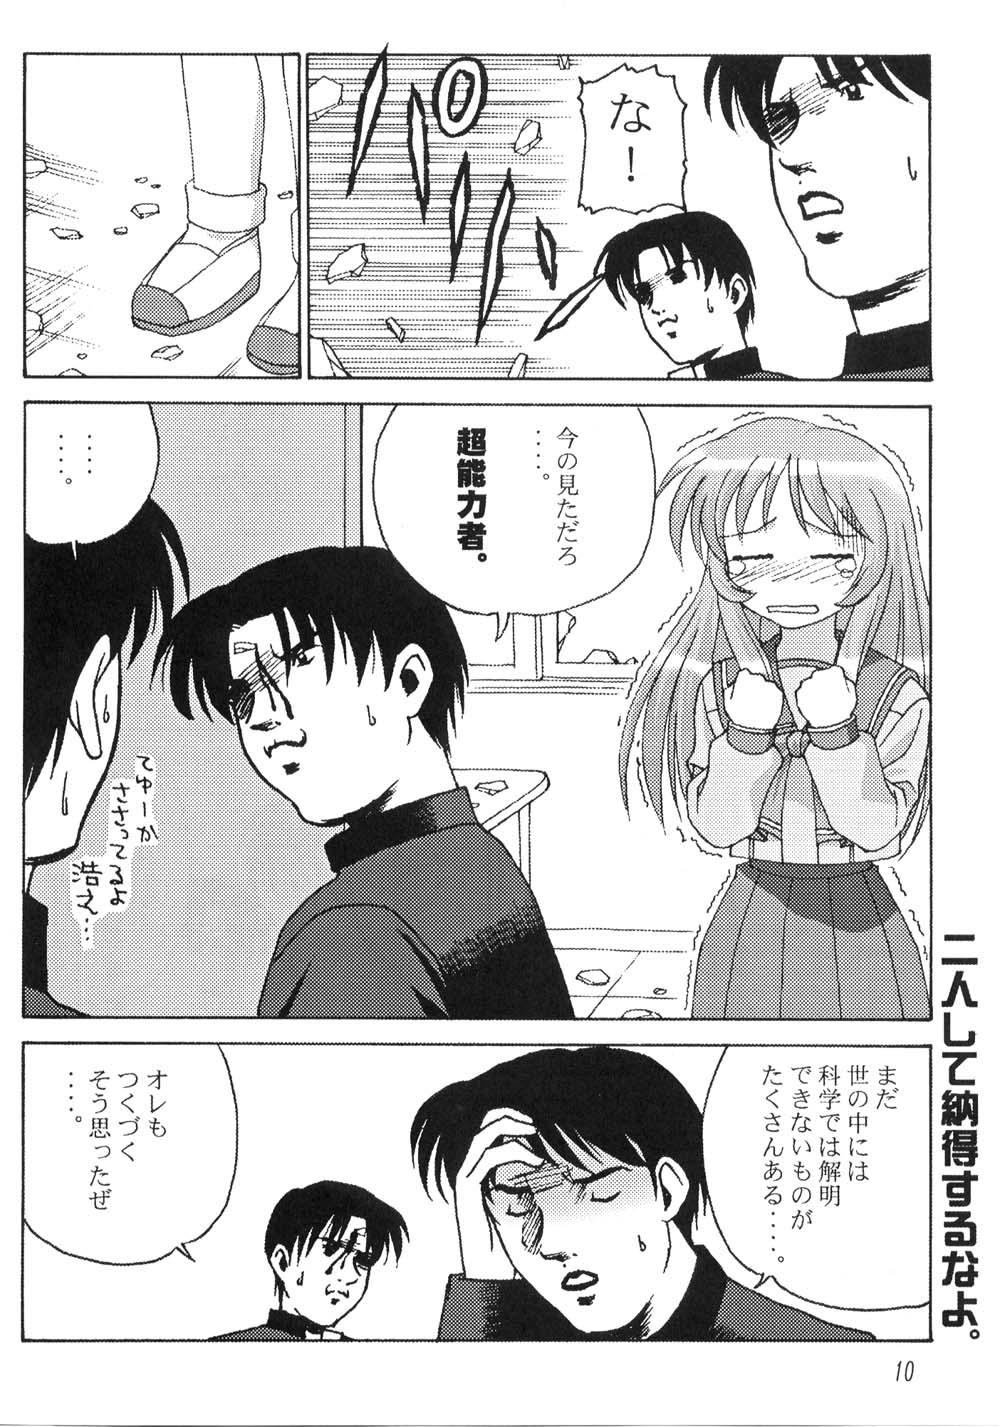 High Definition Credit Note Vol. 5 - To heart Comic party Kizuato Mamada - Page 9